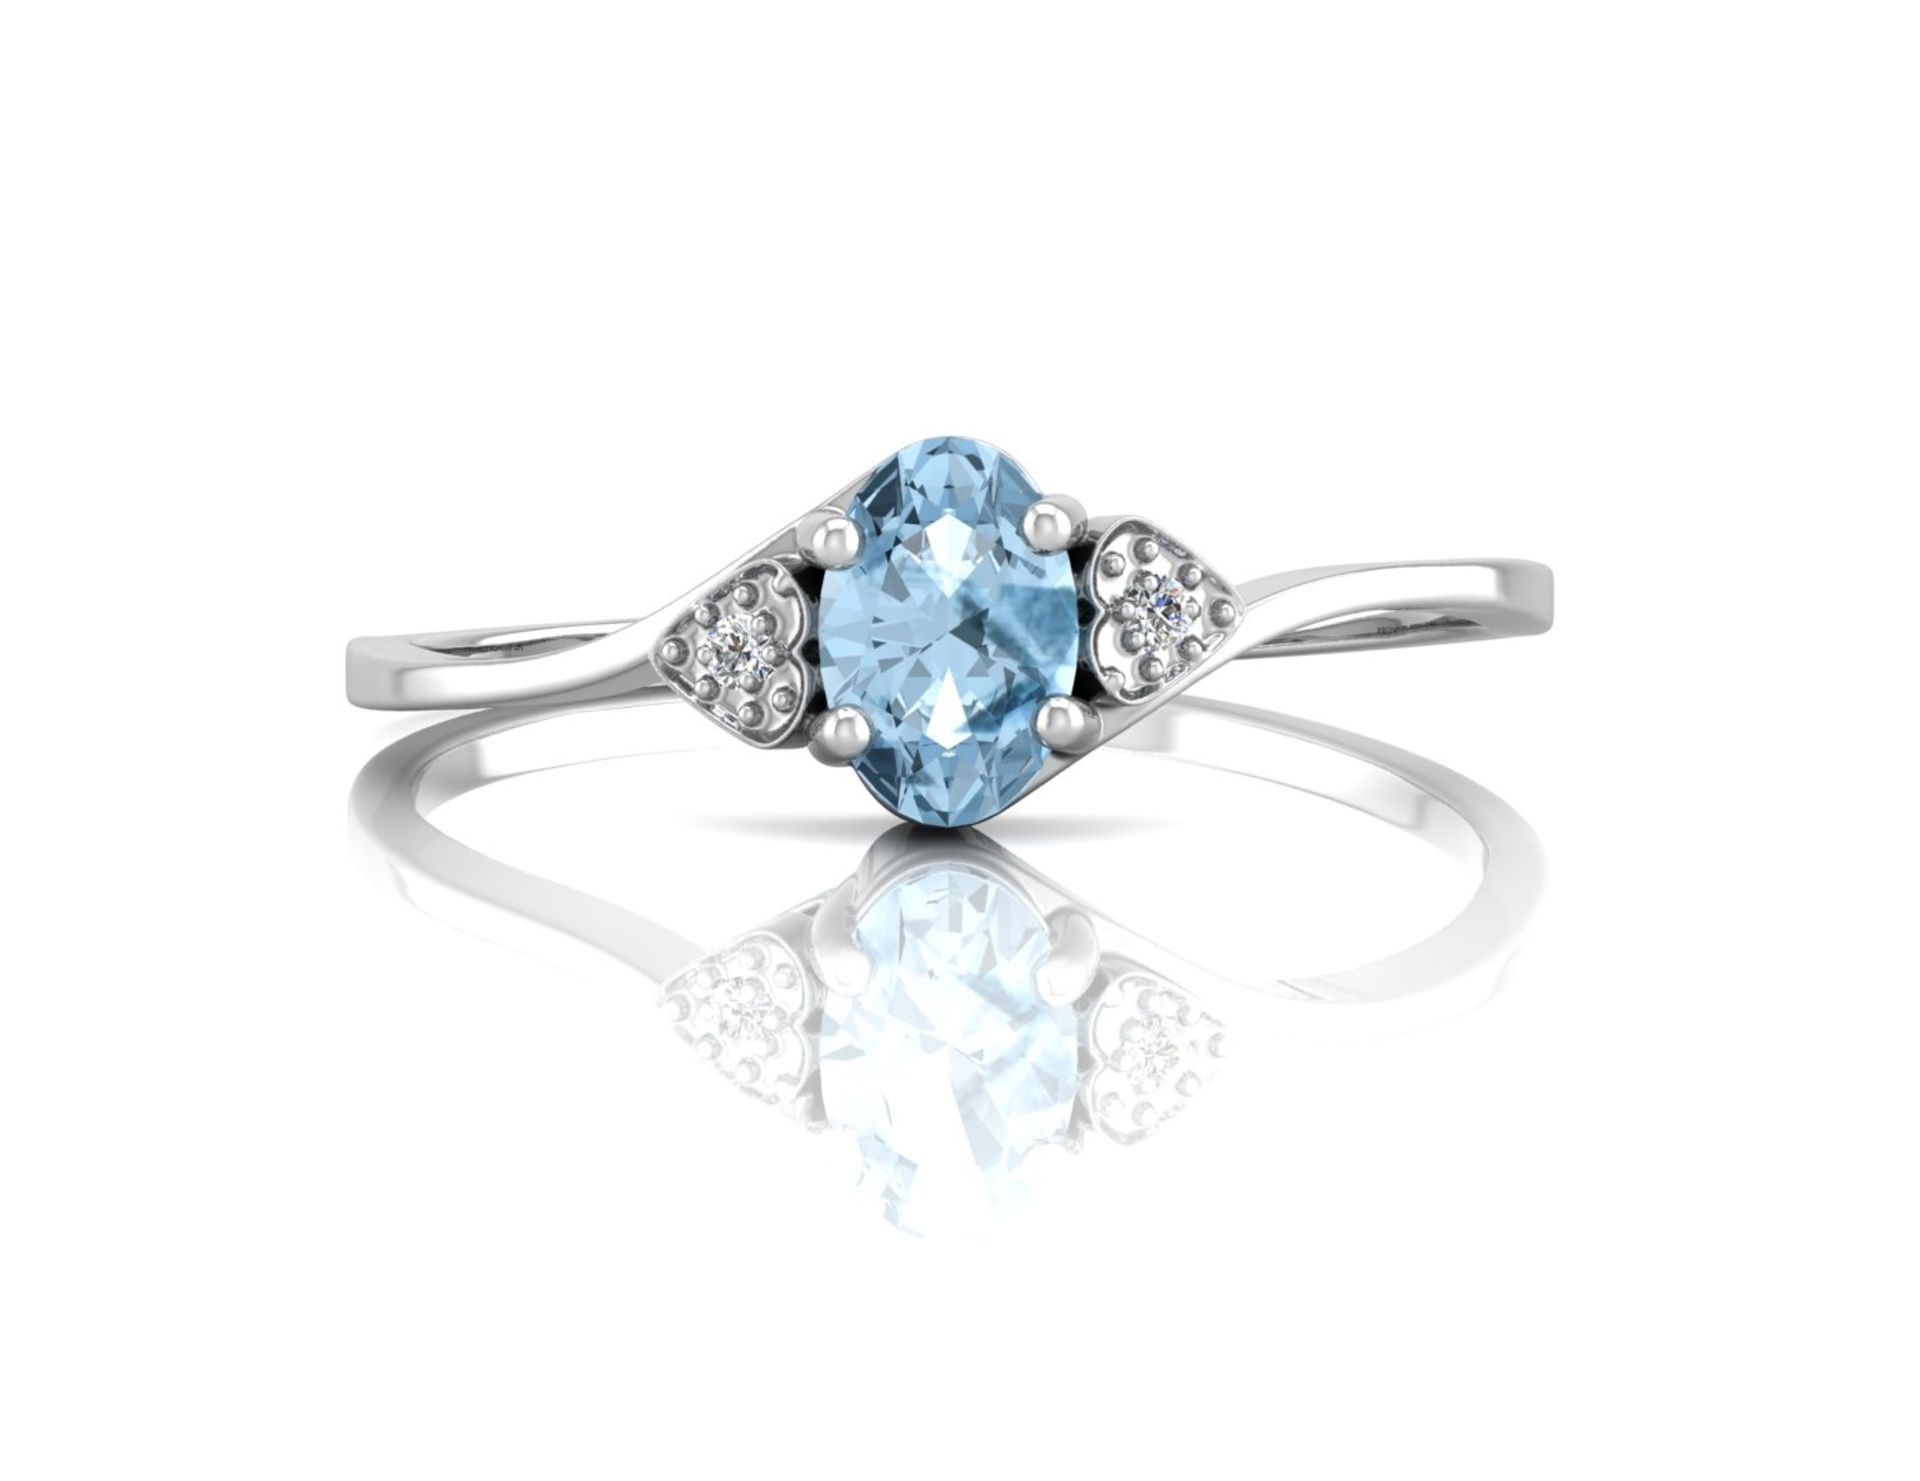 9ct White Gold Fancy Cluster Diamond Blue Topaz Ring 0.01 Carats - Valued by AGI £275.00 - 9ct White - Image 4 of 5